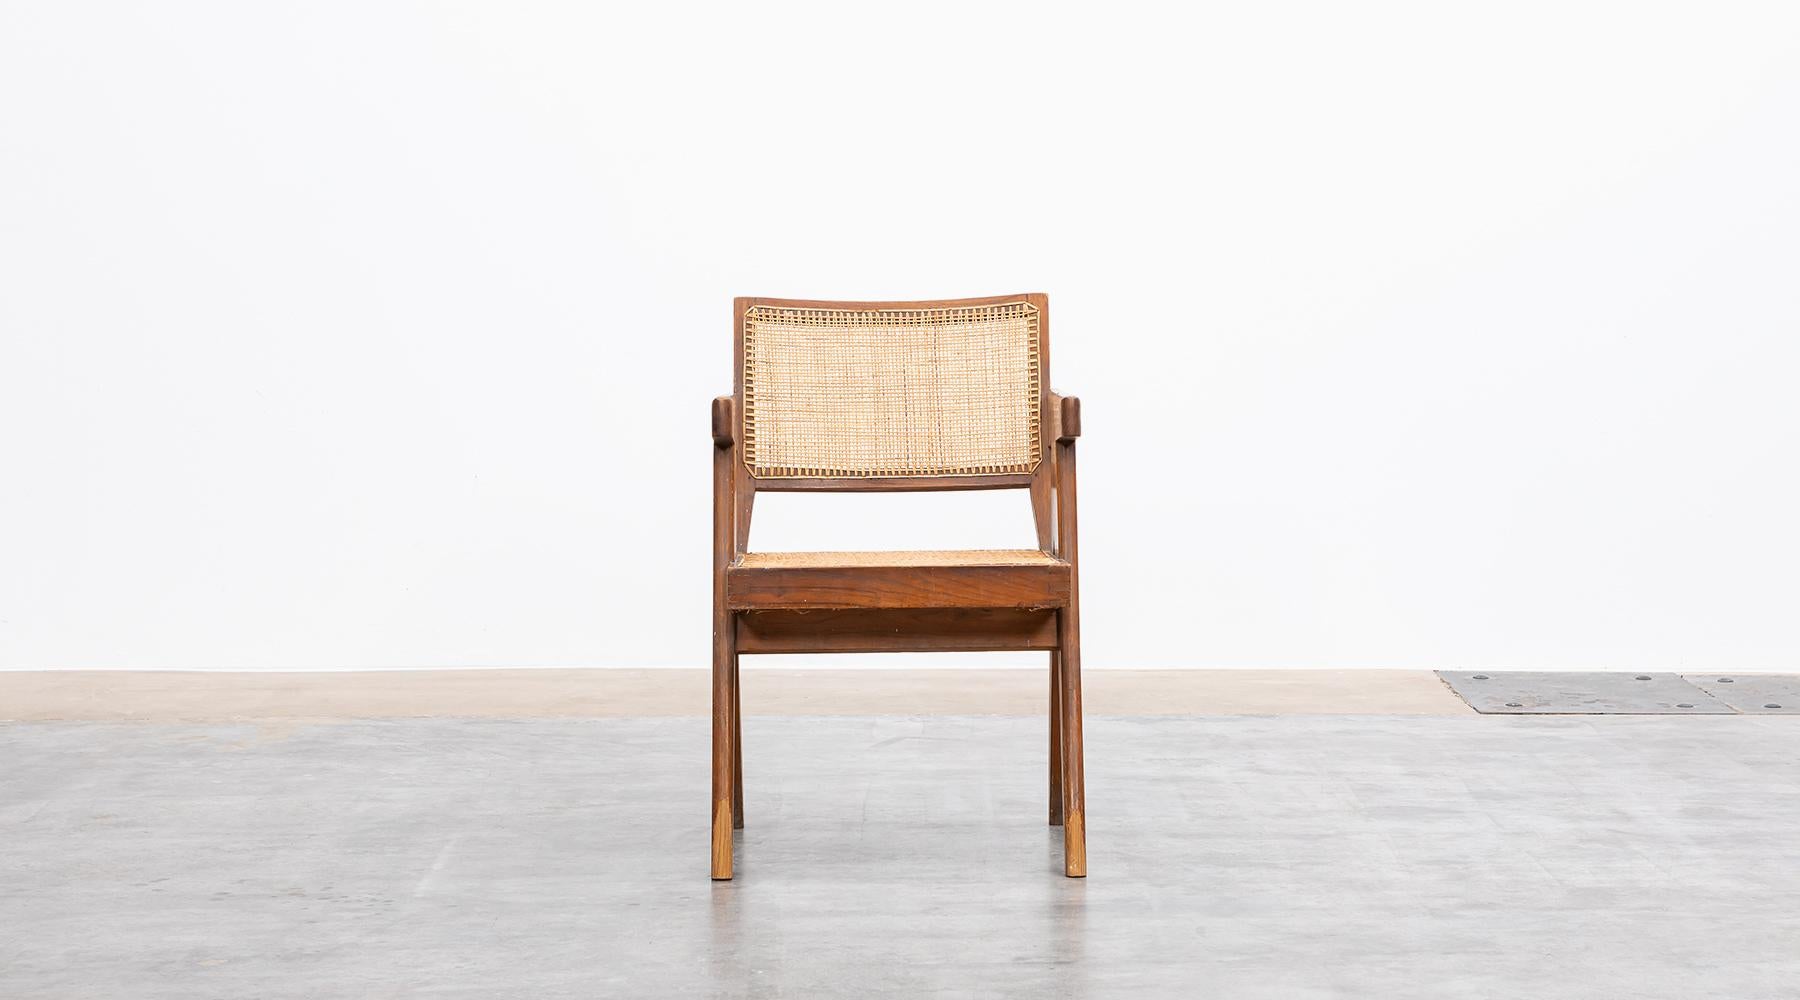 Teak and cane, Lounge chair designed by Pierre Jeanneret for Chandigarh, India, 1955.

Single original lounge chair designed by Pierre Jeanneret in teak with woven cane on the seat and curved backrest appears in beautiful patina. The chair has a